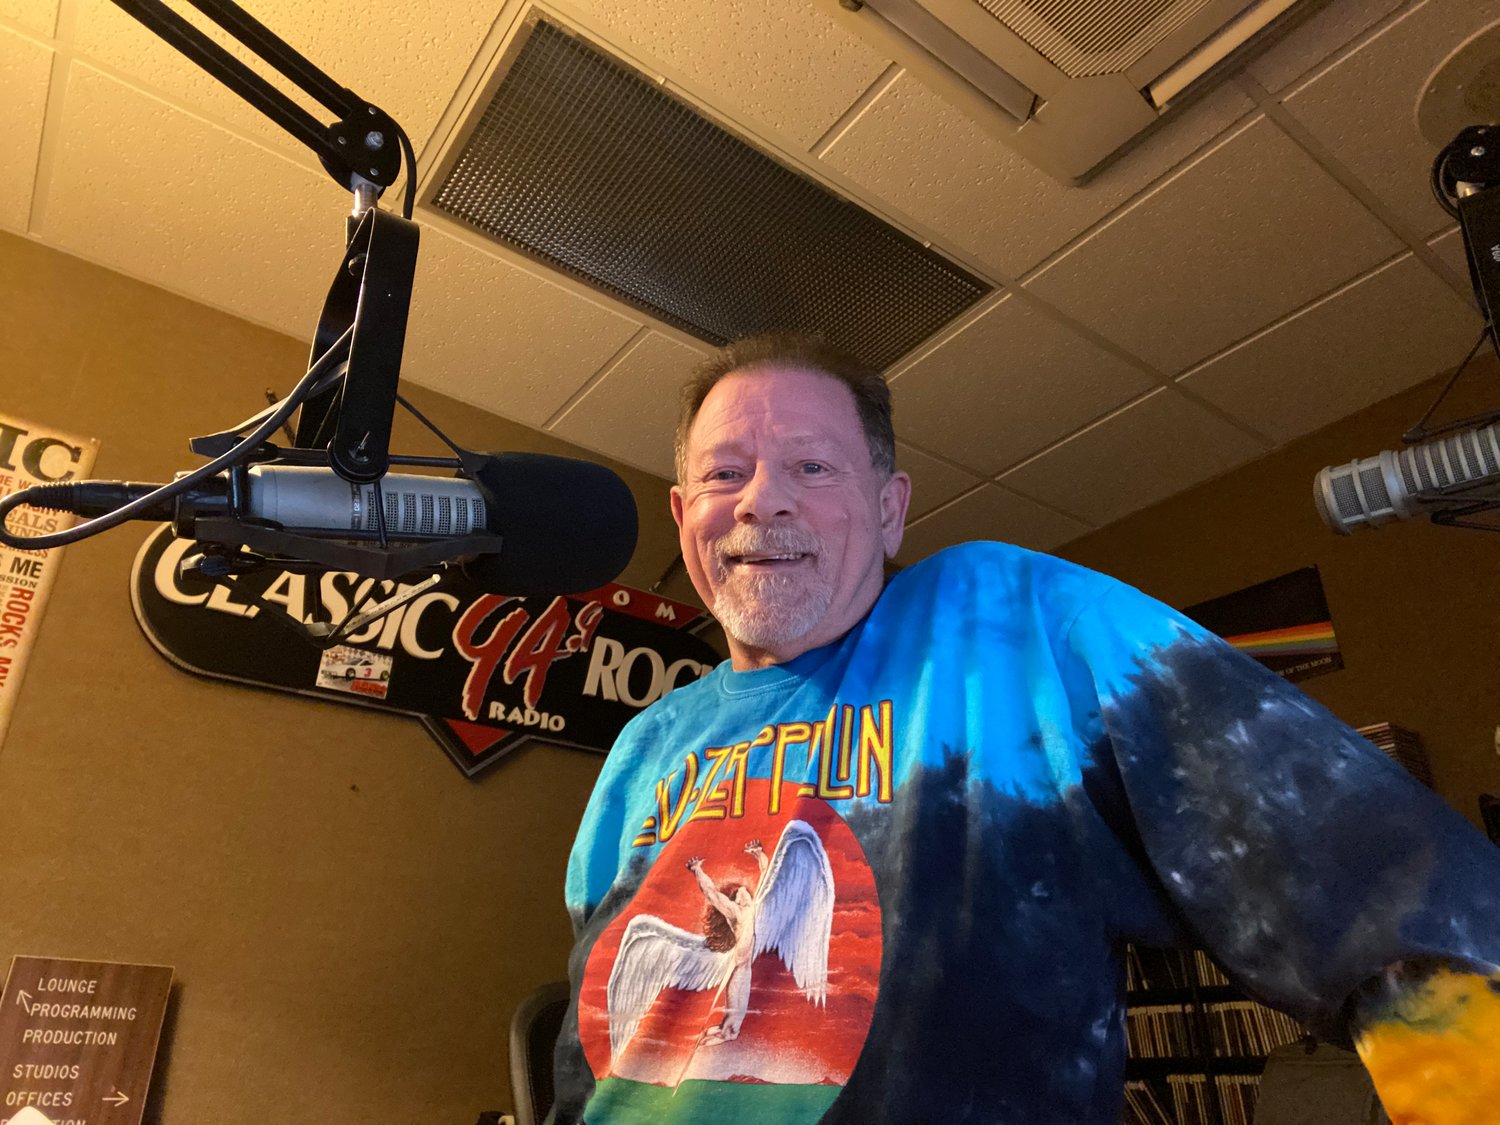 Alberts has continued the legacy of Larry Allen, who started the “All Request Saturday Night” show in 1985.